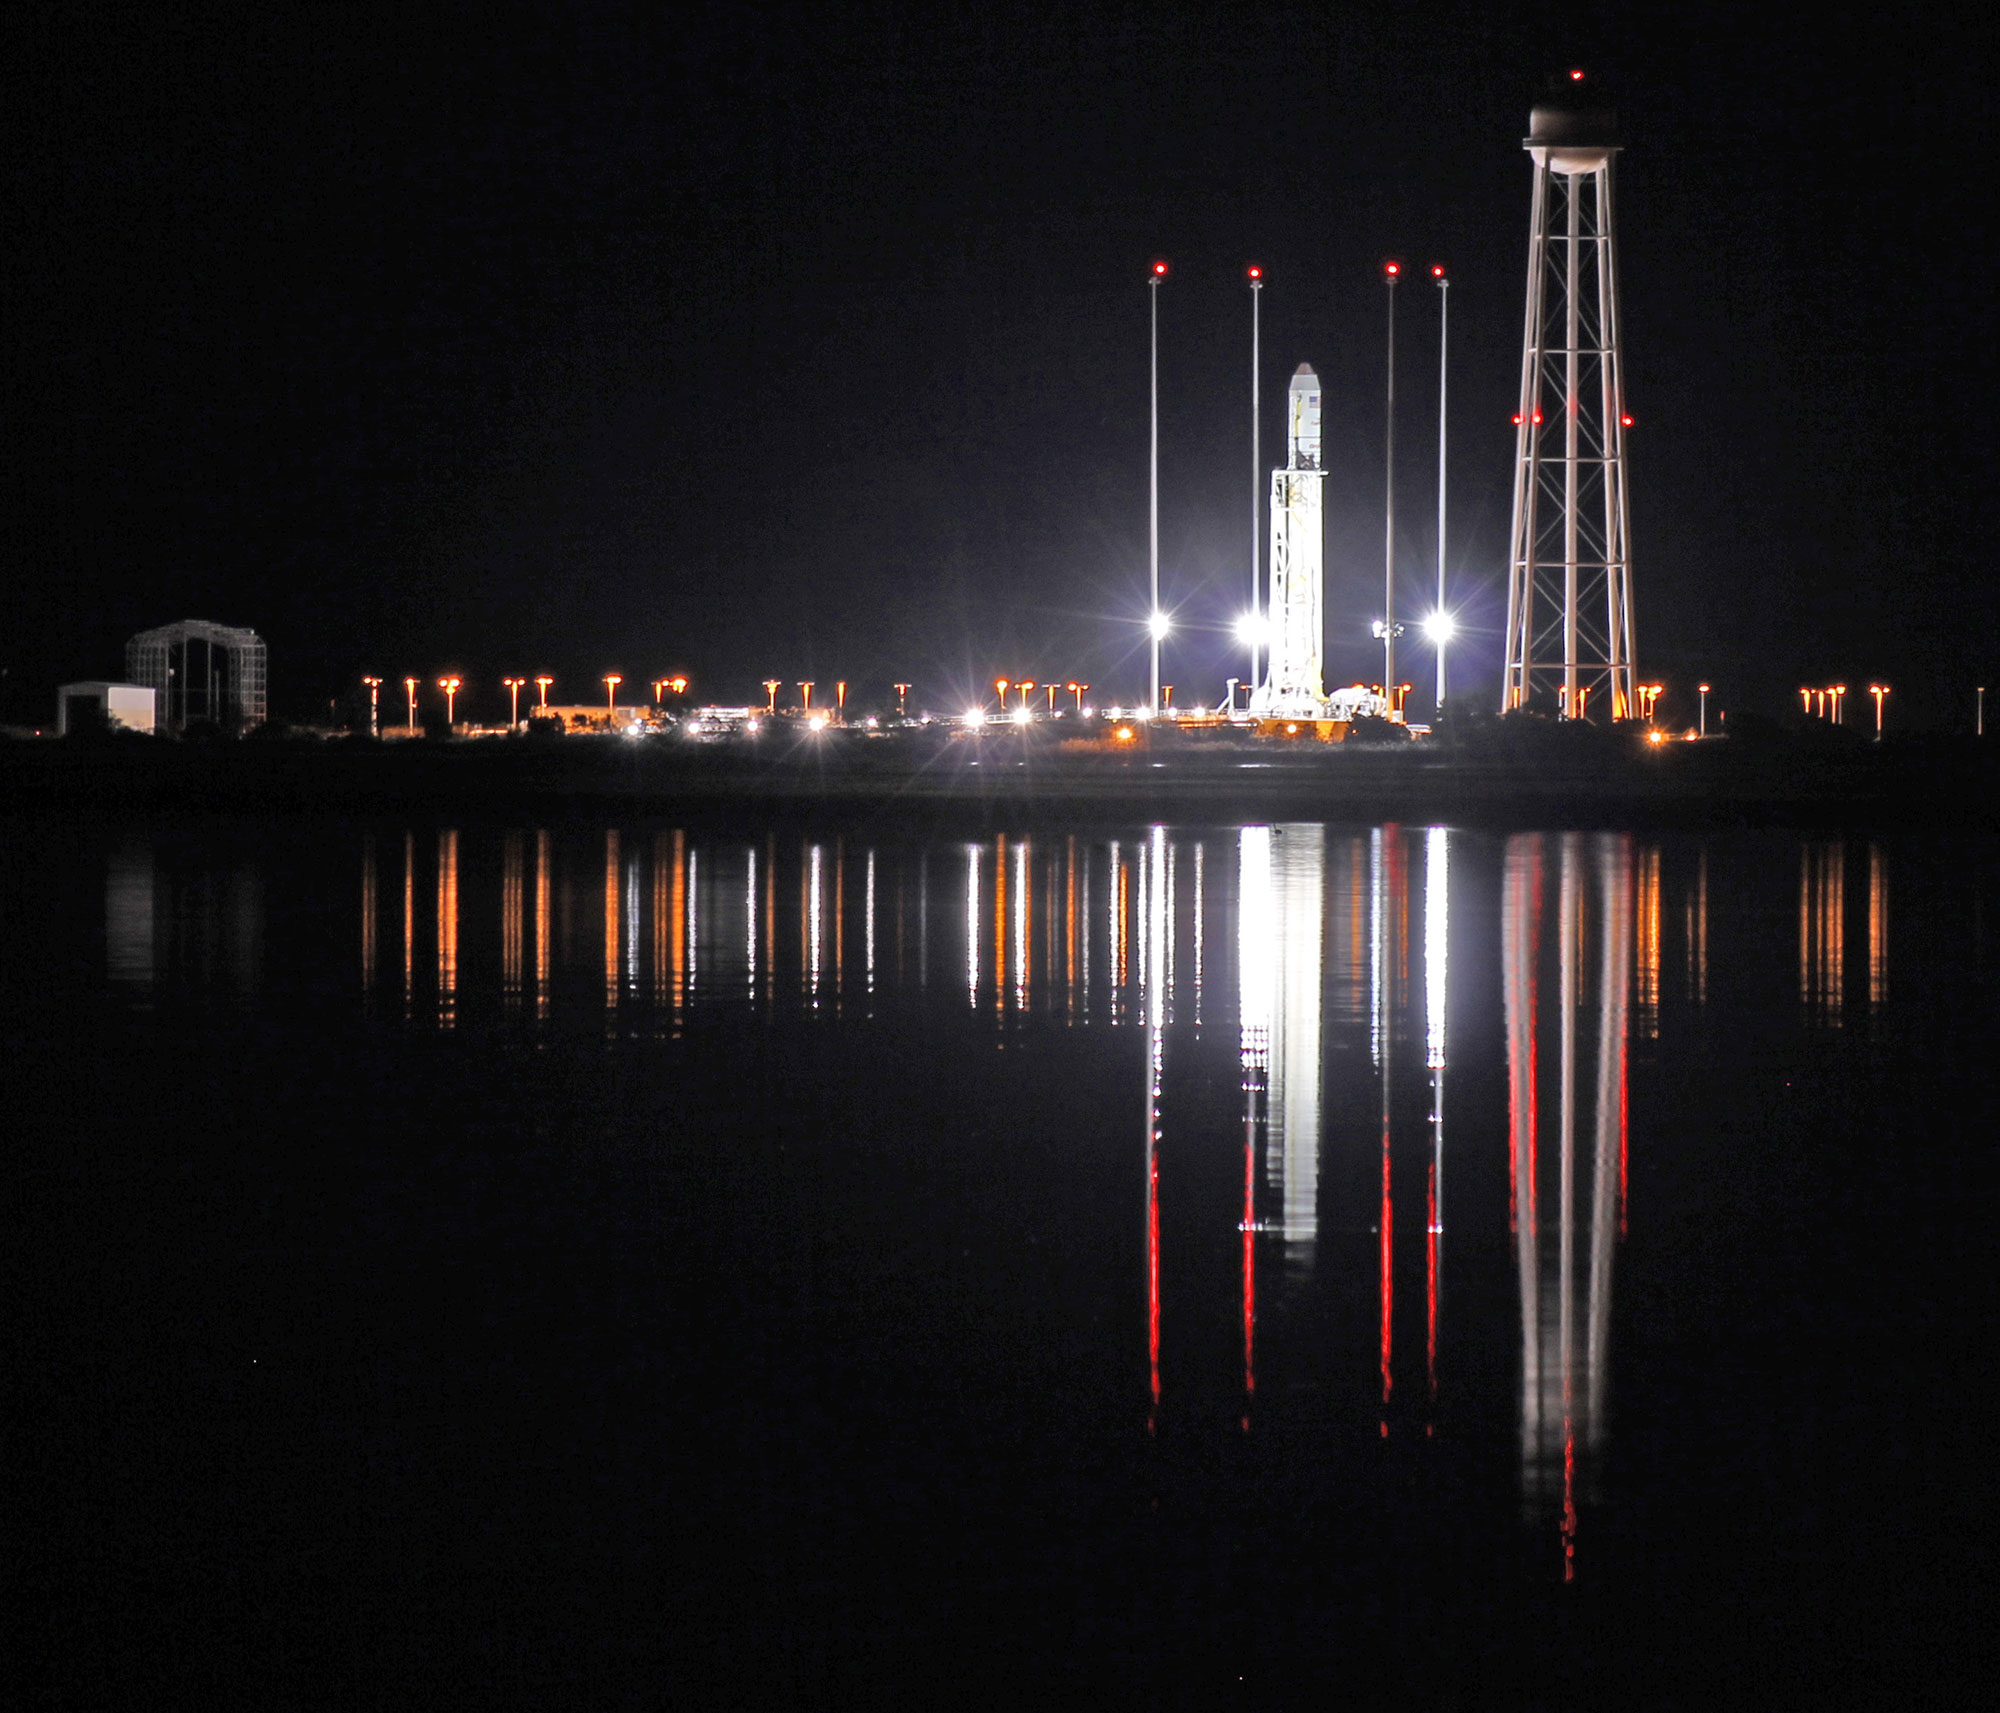 An Antares rocket stands erect, reflecting off the calm waters the night before its first night launch from NASA’s Wallops Flight Facility, VA. Credit: Ken Kremer